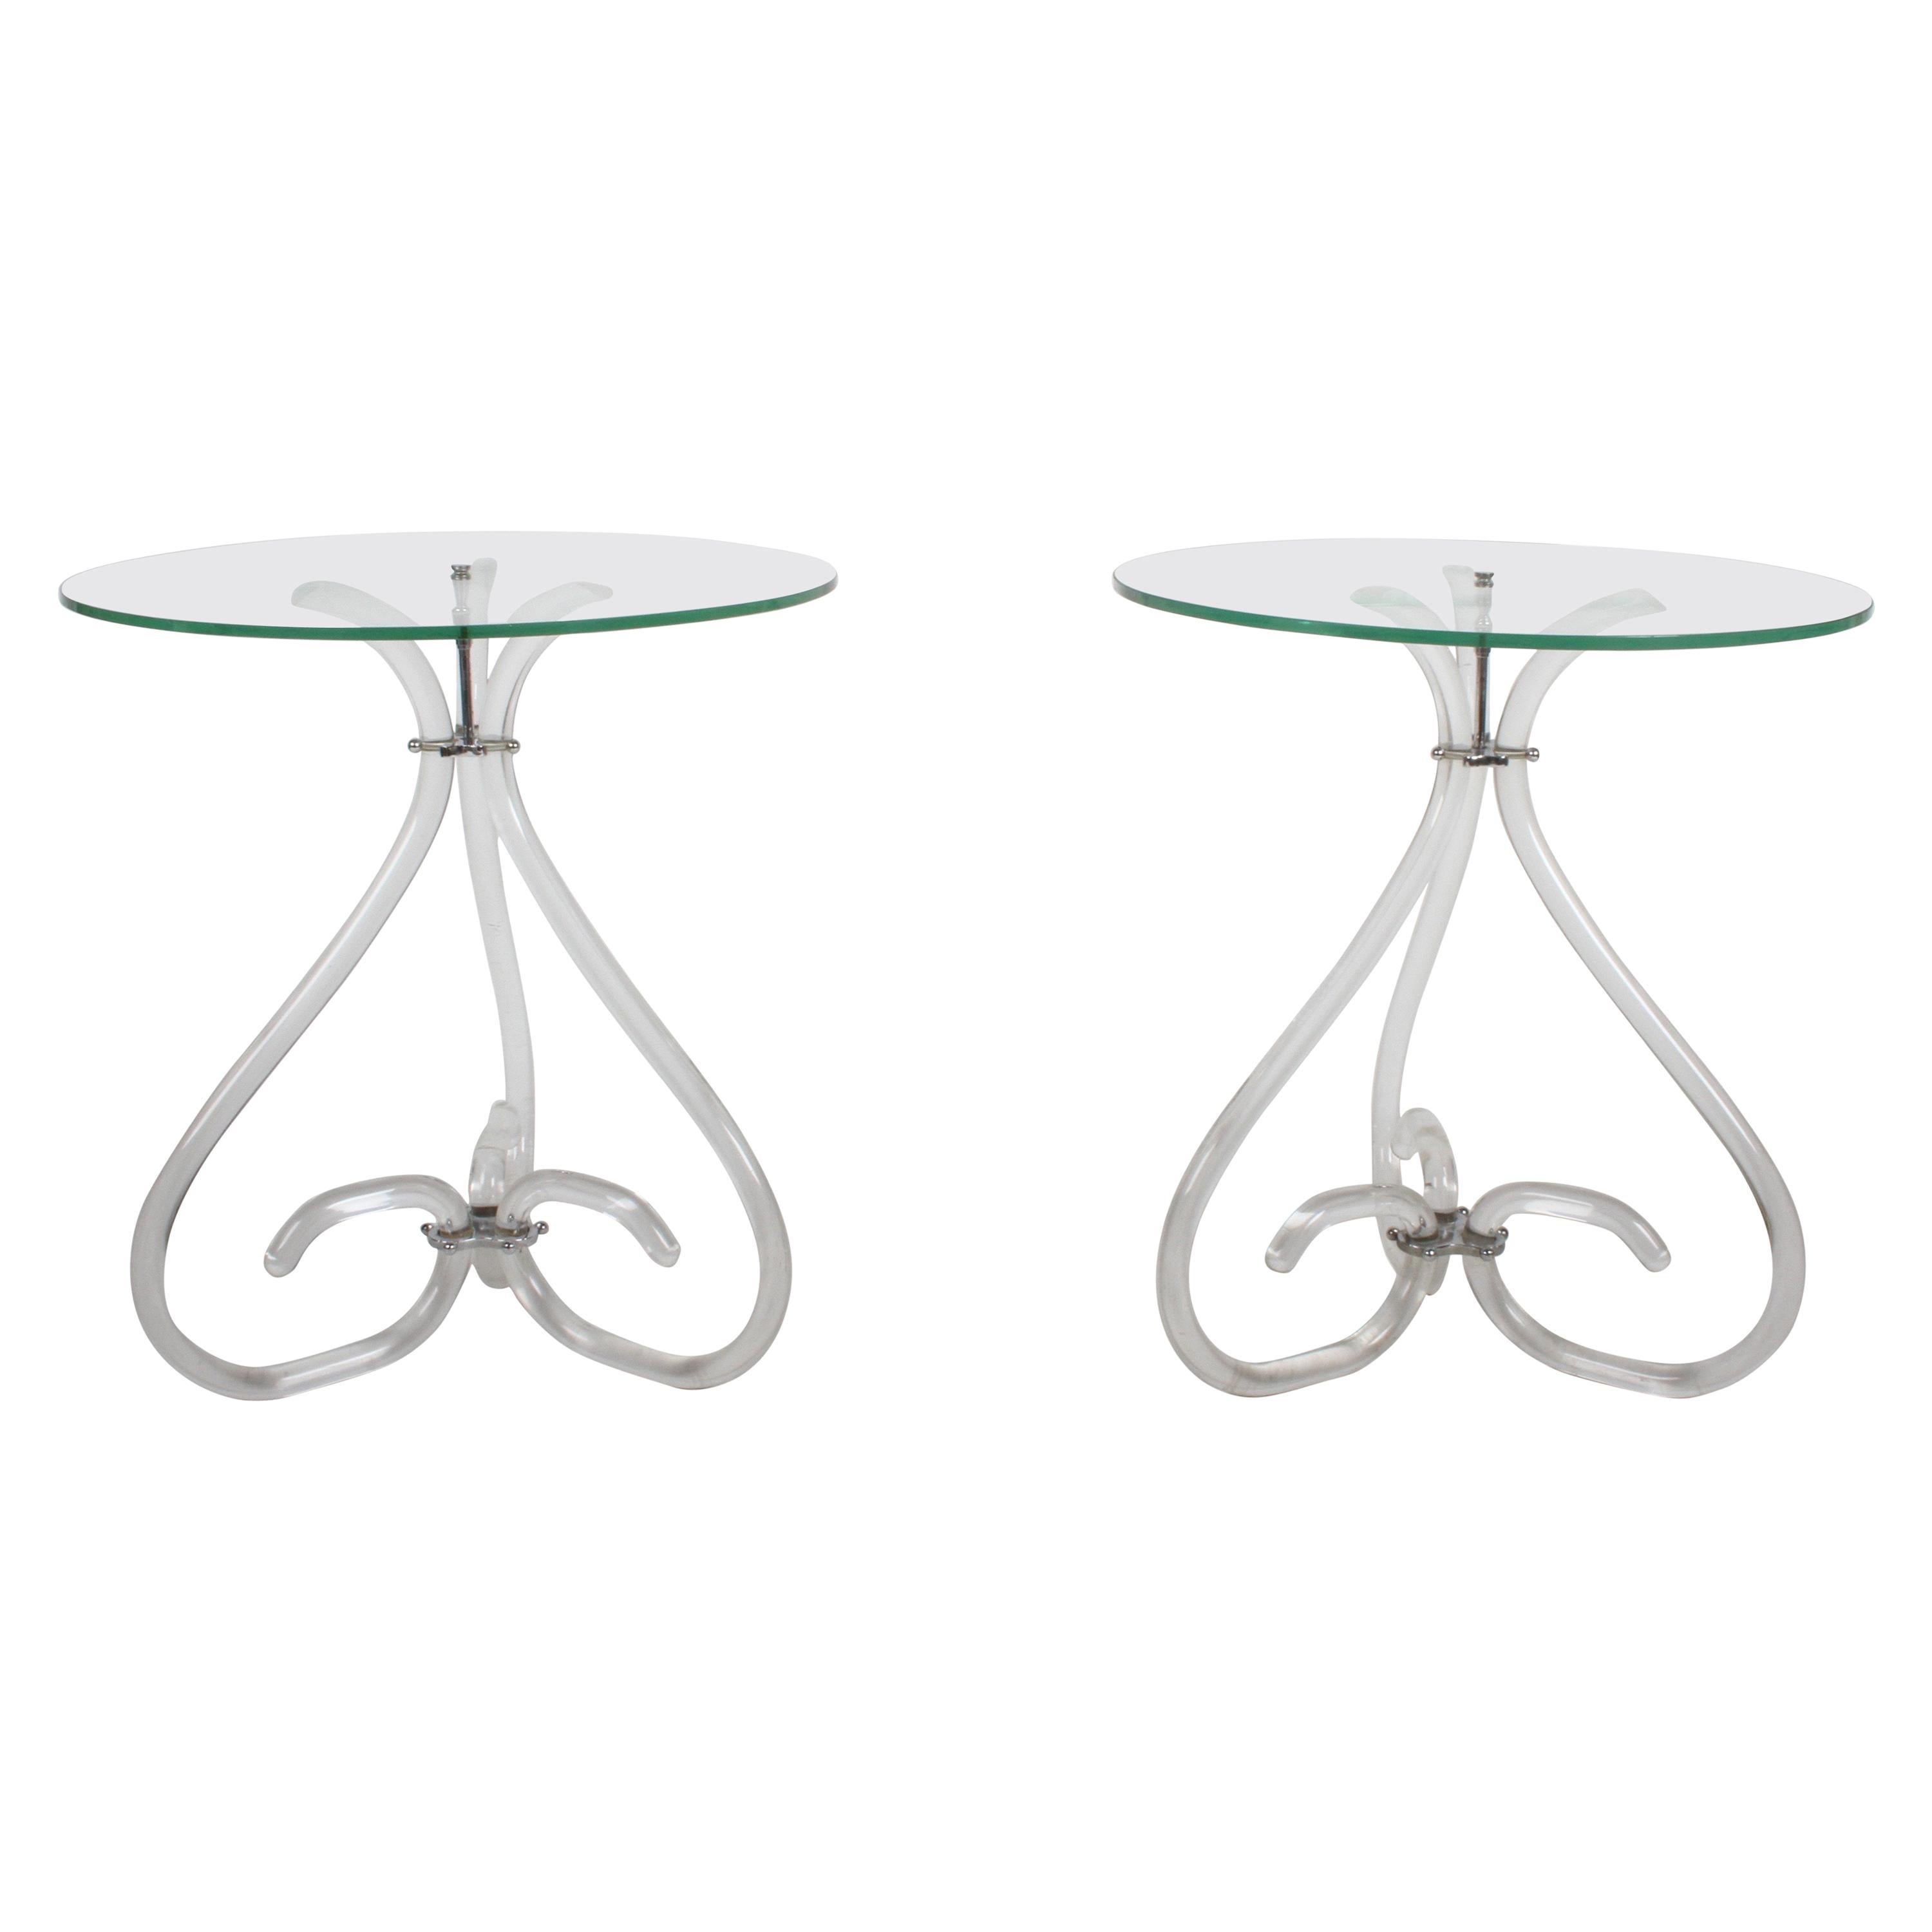 Pair of Vintage Lucite and Glass Side Tables in the Style of Dorothy Thorpe